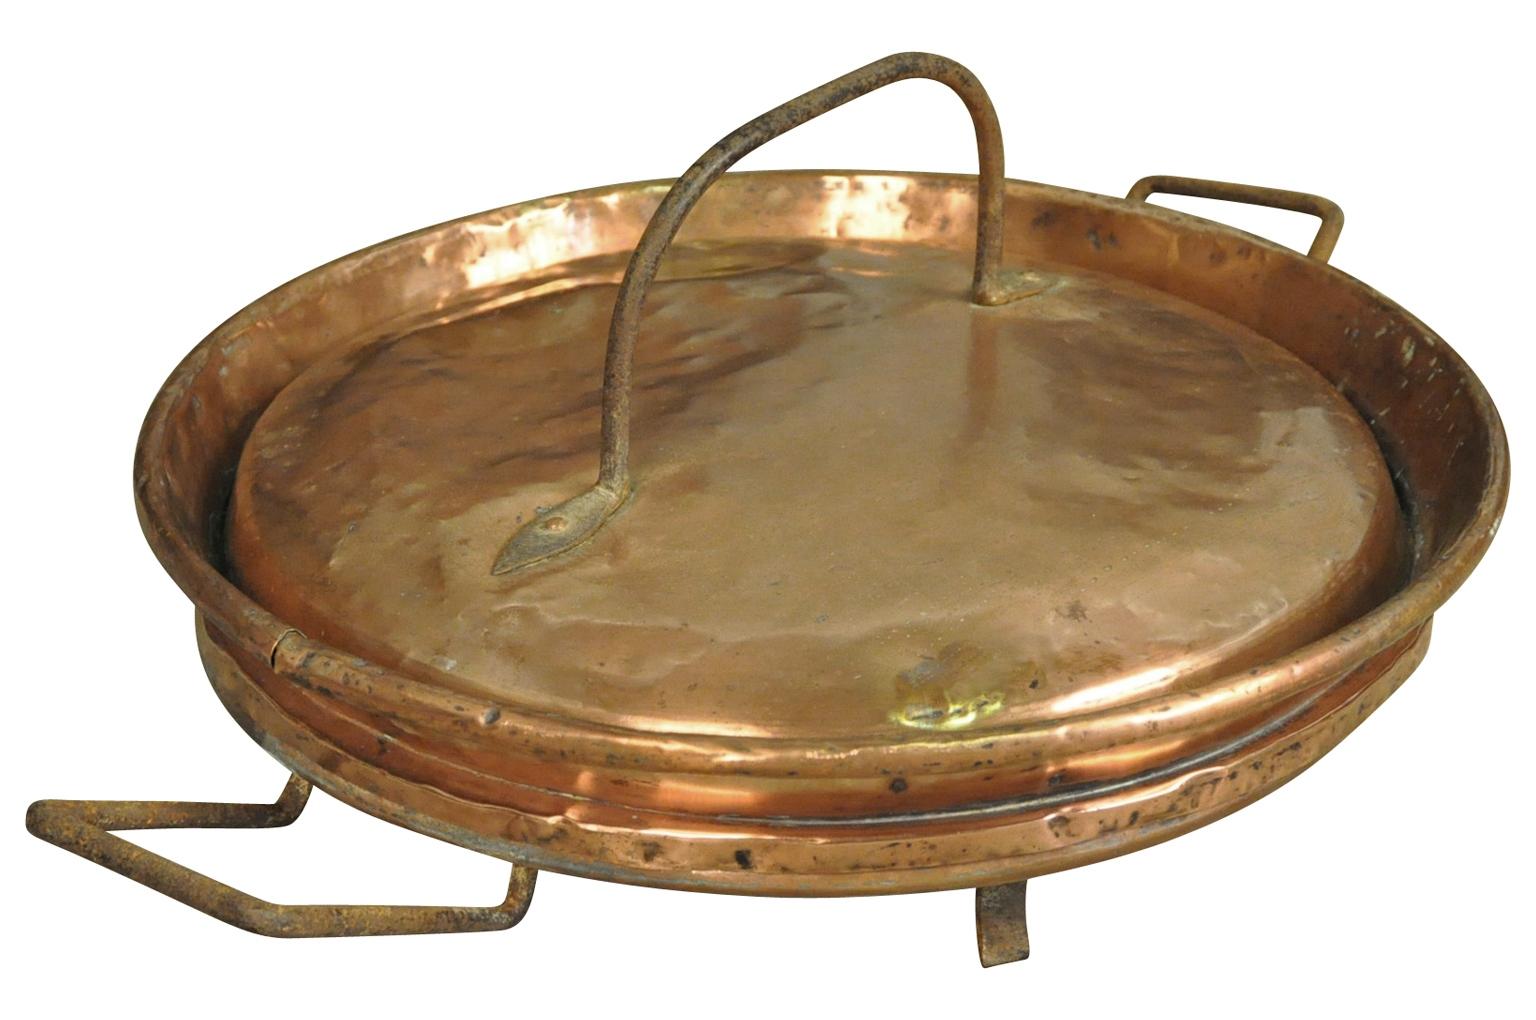 A very unique French 18th century copperware piece - a large scale covered and footed platter or serving dish - Tortiere. Wonderful as an accent piece in any kitchen or as a center piece on a dining table.